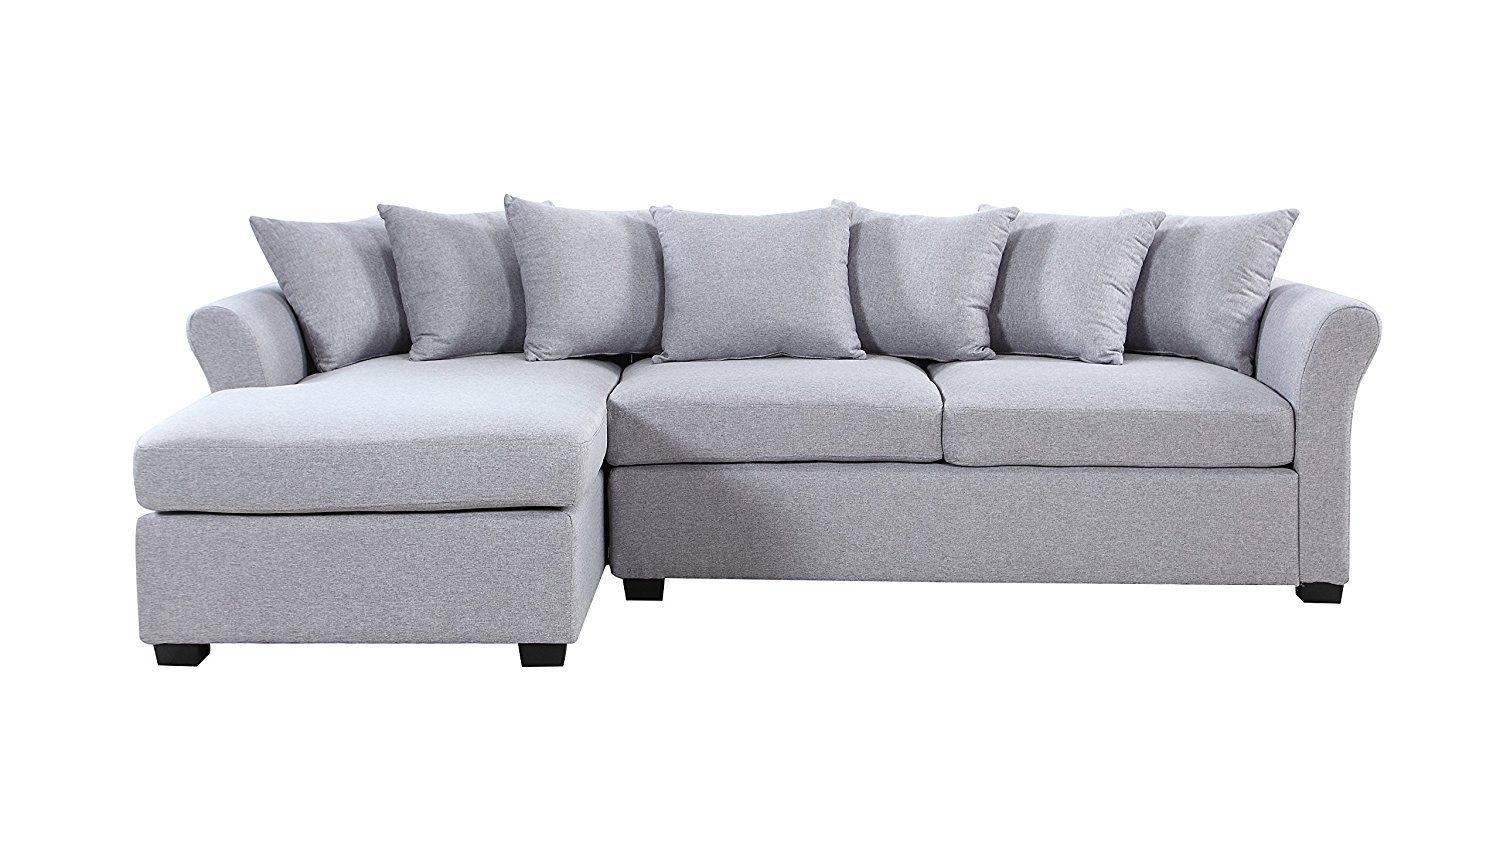 Modern Large Fabric Sectional Sofa, L-Shape Couch, Extra ...